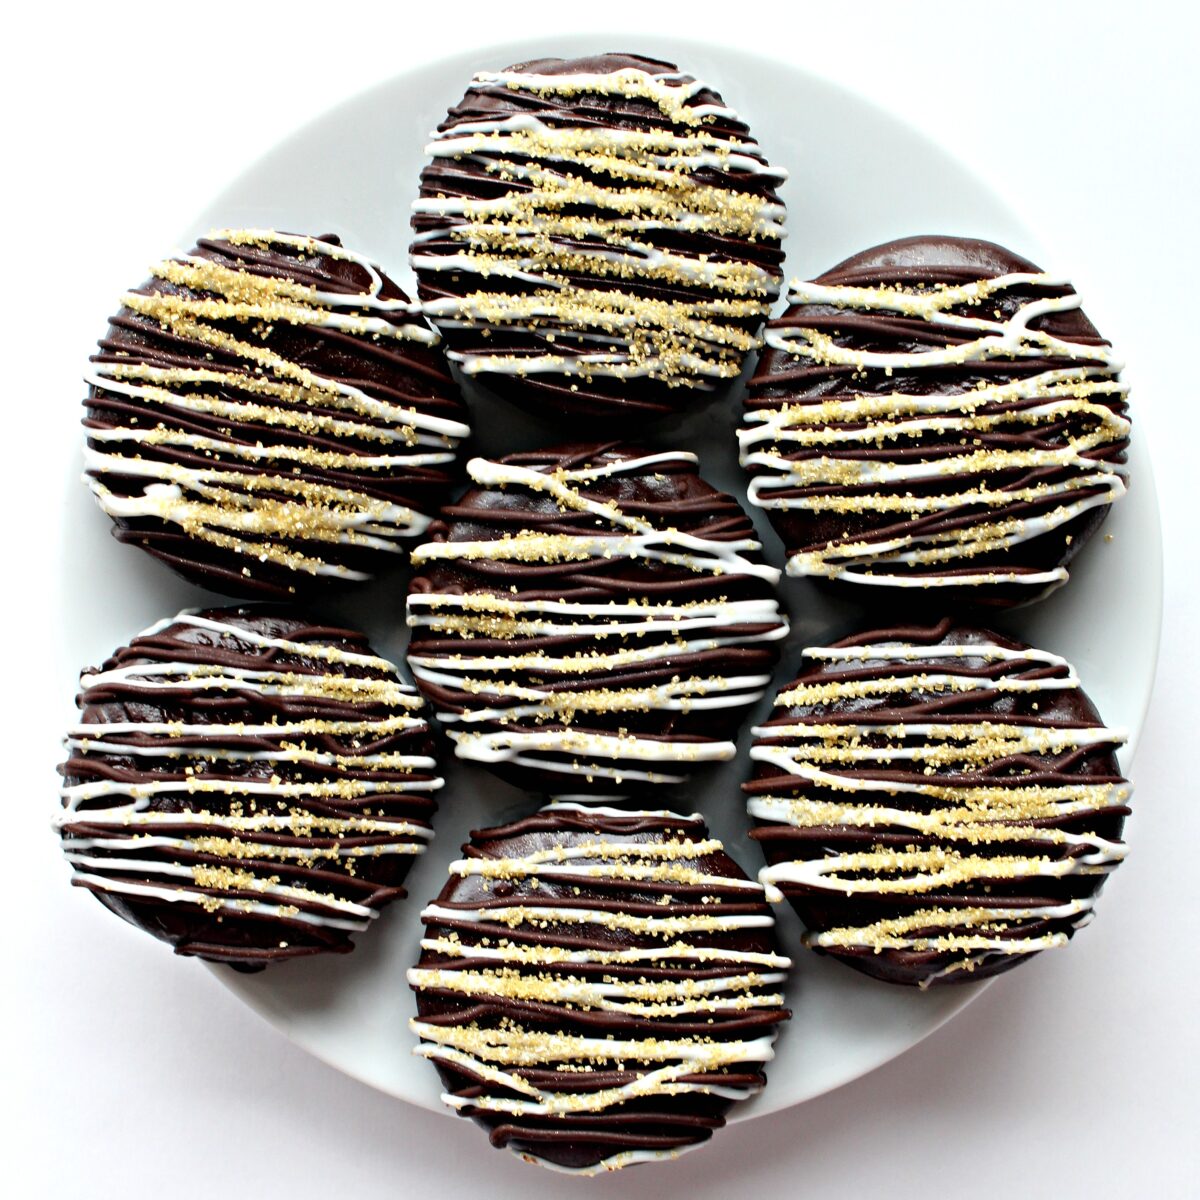  Chocolate Dipped Oreos topped with white chocolate drizzle and gold sugar.